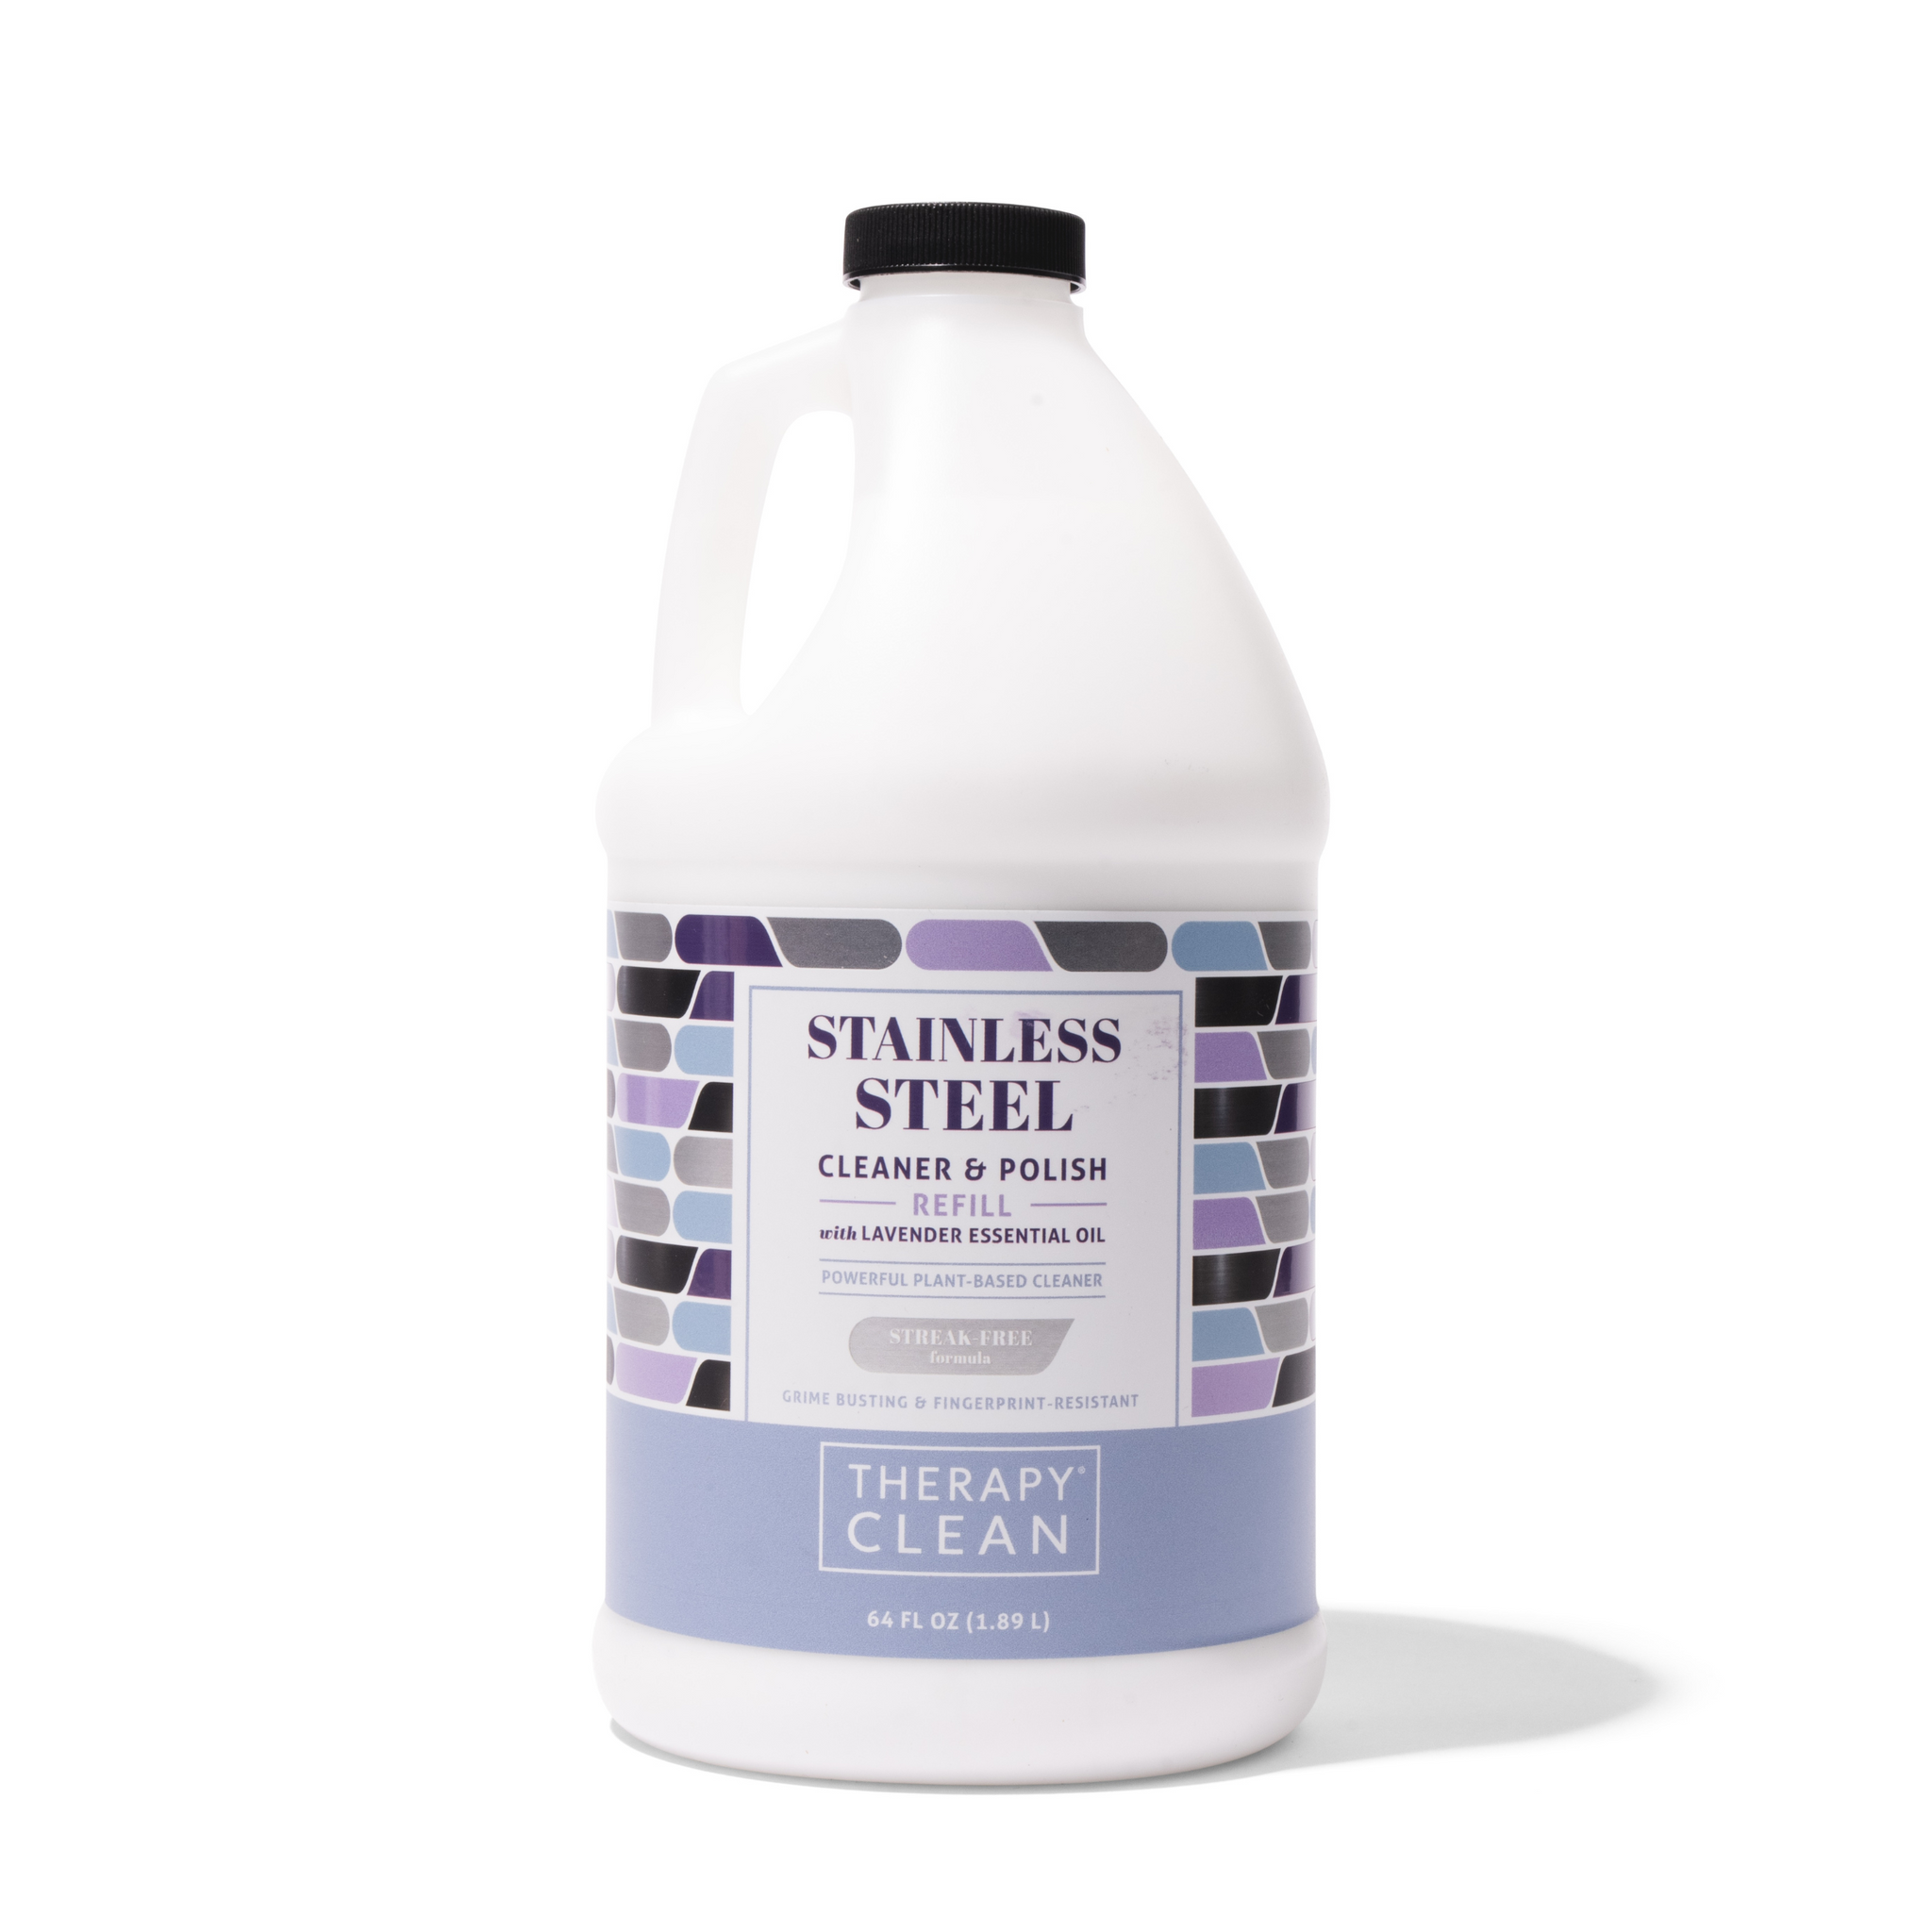 Stainless Steel Cleaner & Polish 64 oz. Refill – Therapy Clean